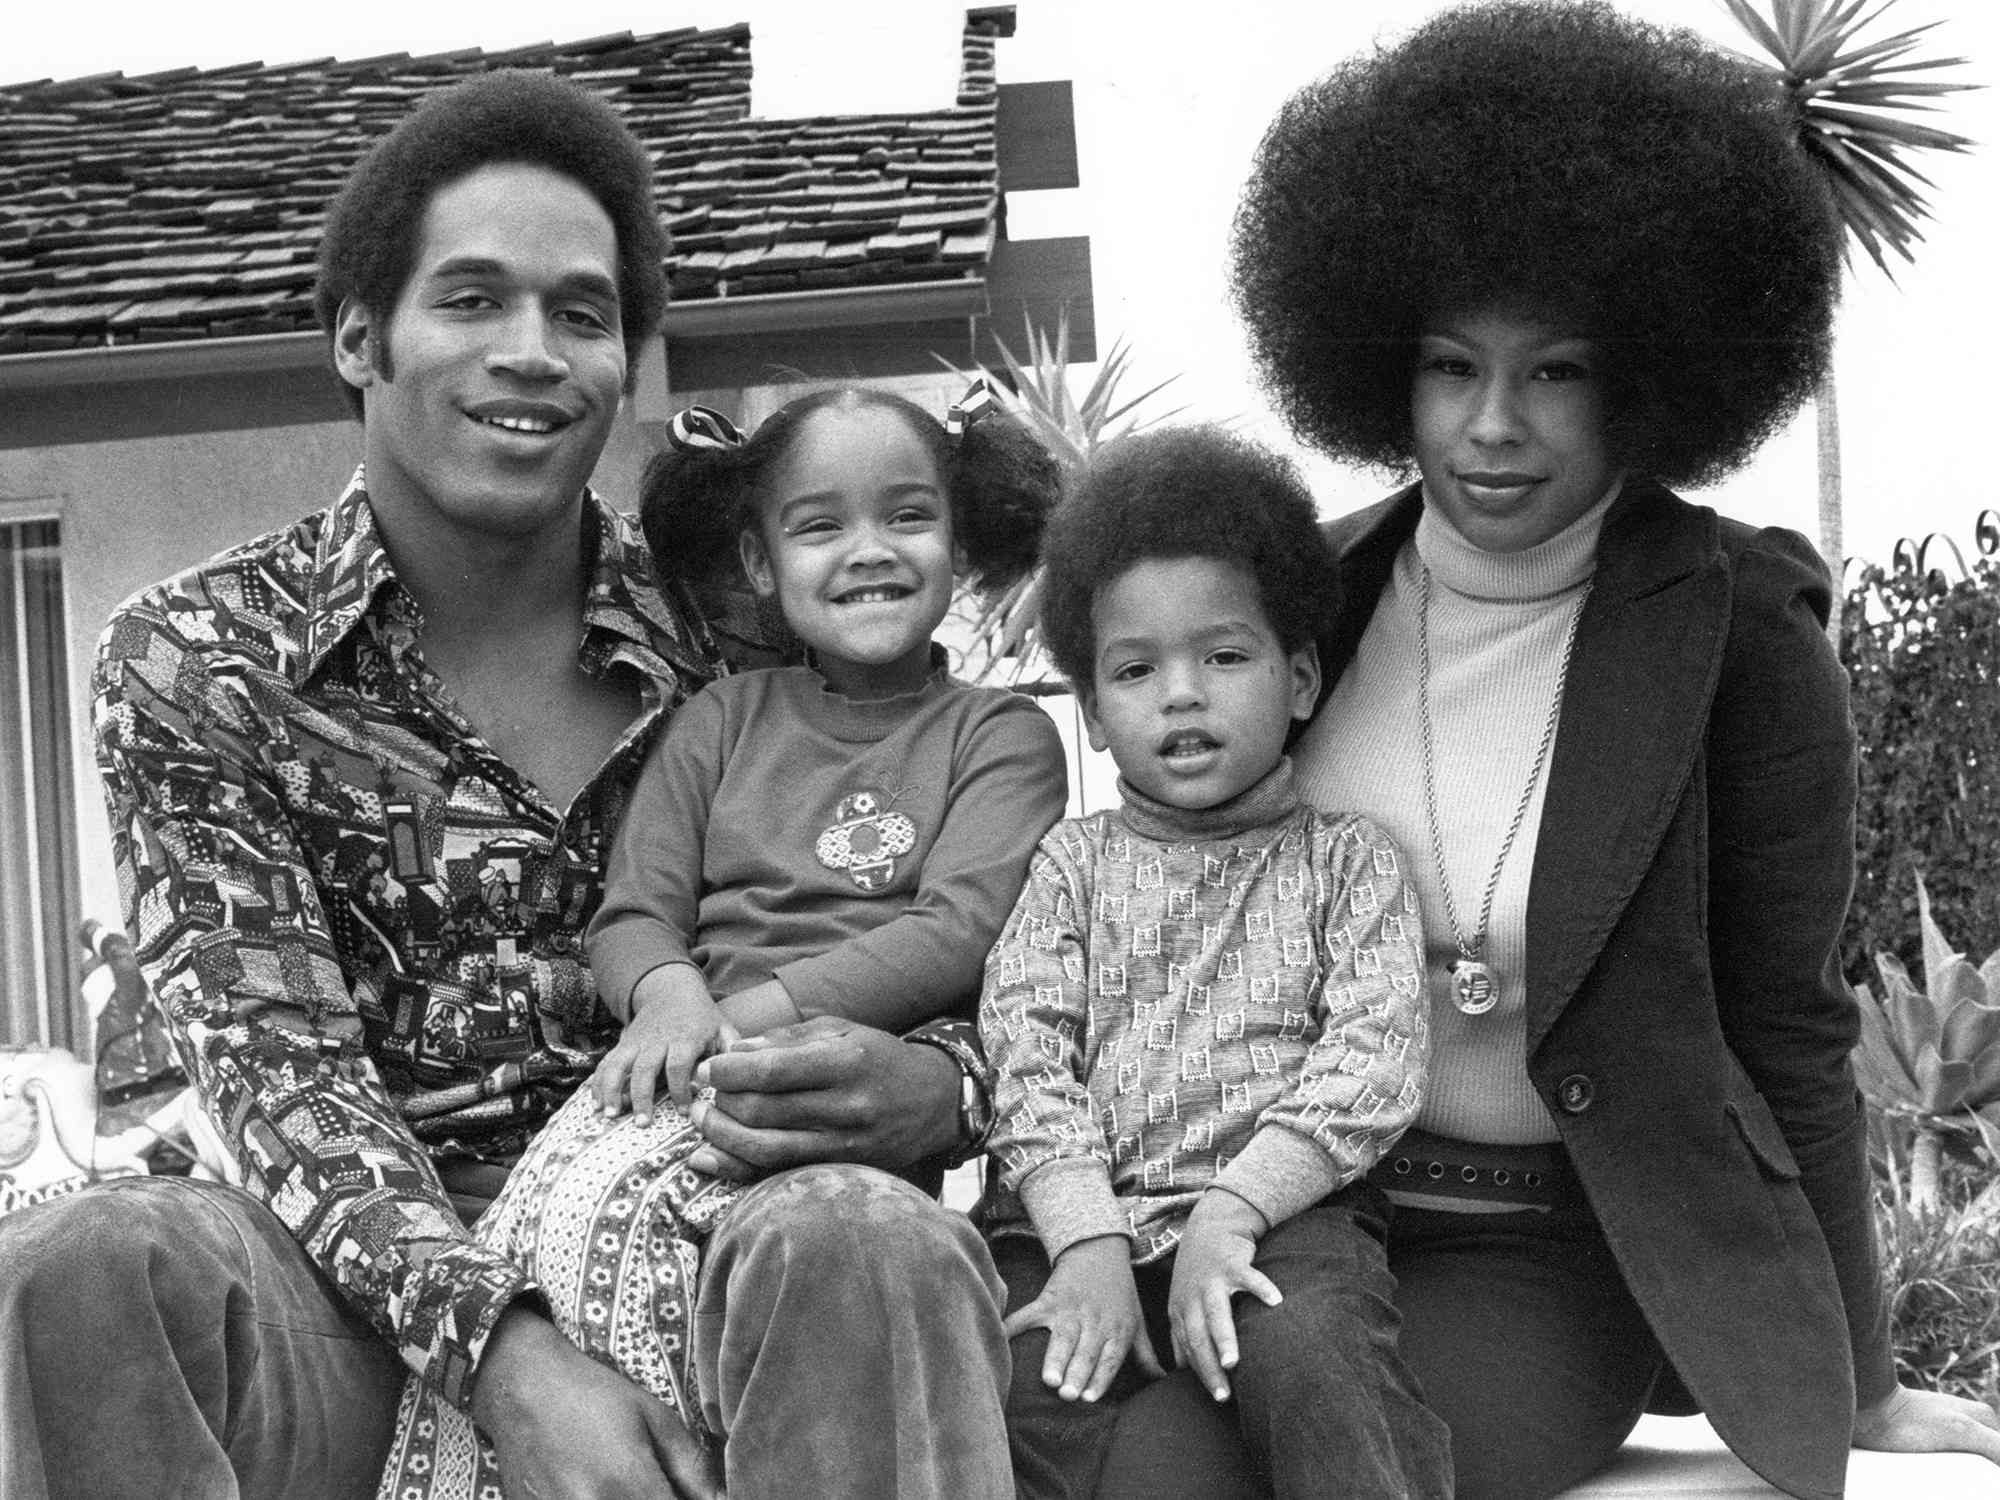 O.J. Simspson with Marguerite Simpson, daughter Arnelle and son Jason on January 8, 1973 in Los Angeles, California.